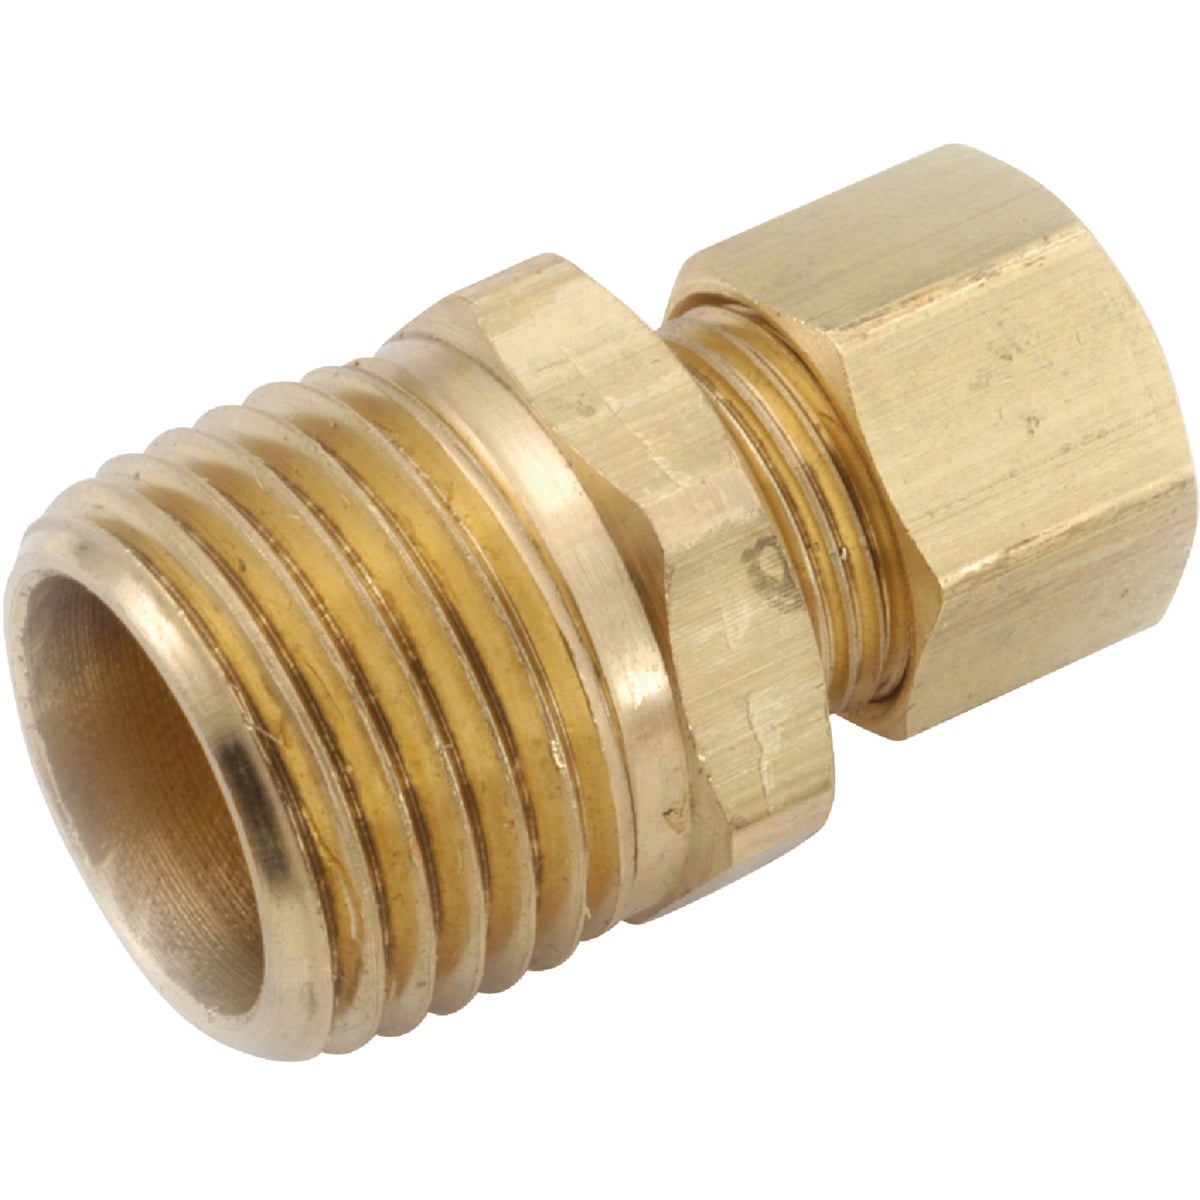 5/8X3/4 MALE CONNECTOR